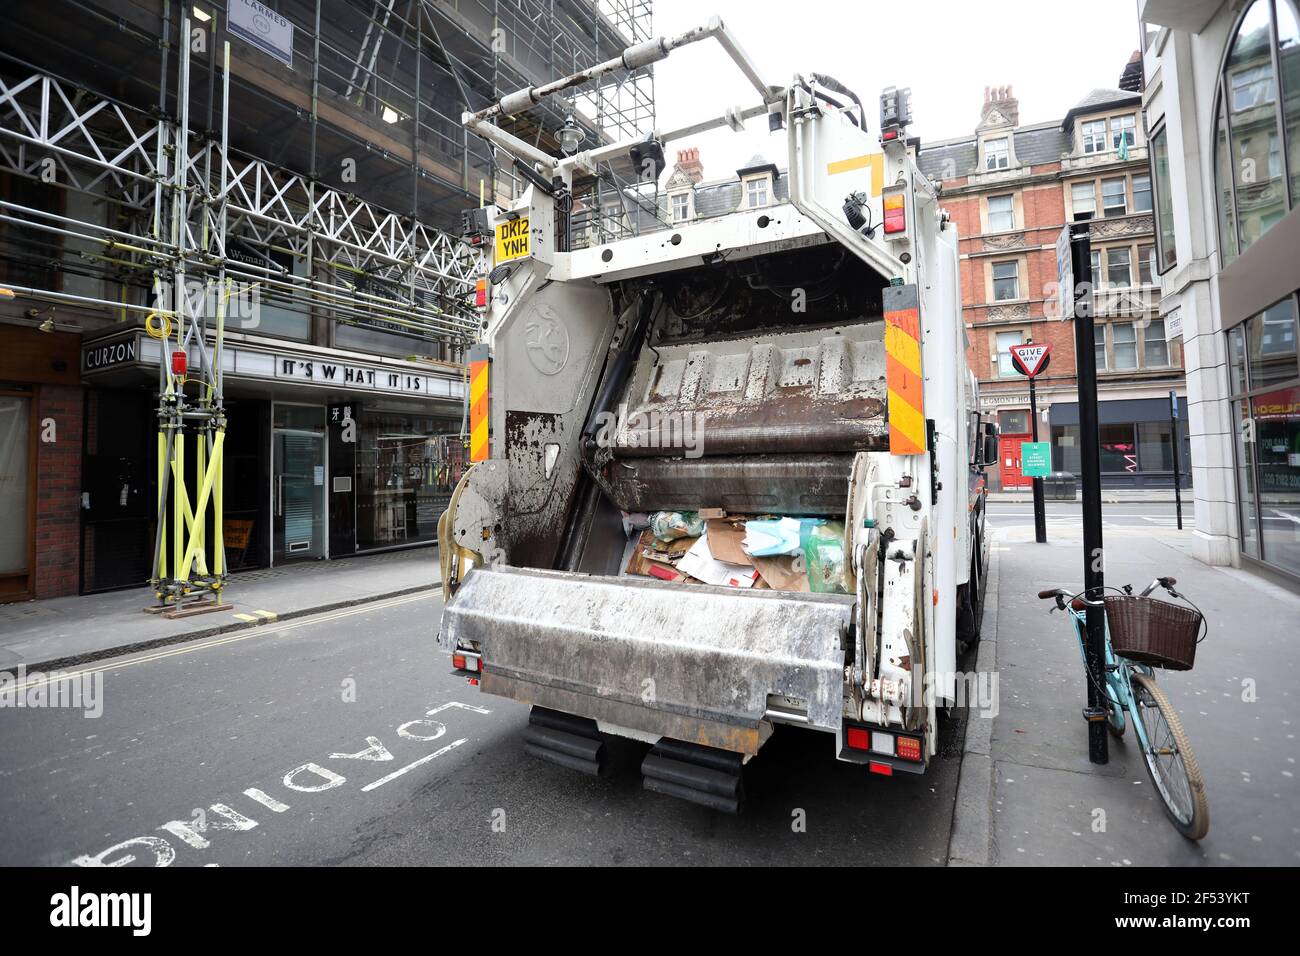 London, UK. 23rd Mar, 2021. A dustcart refuse lorry. Today marks the first anniversary of the start of UK lockdown restrictions because of the COVID-19 Coronavirus pandemic. A national minute's silence at 12.00pm marks the moment of reflection. London is pictured today (March 23, 2021), on the anniversary of the first Coronavirus lockdown. Credit: Paul Marriott/Alamy Live News Stock Photo